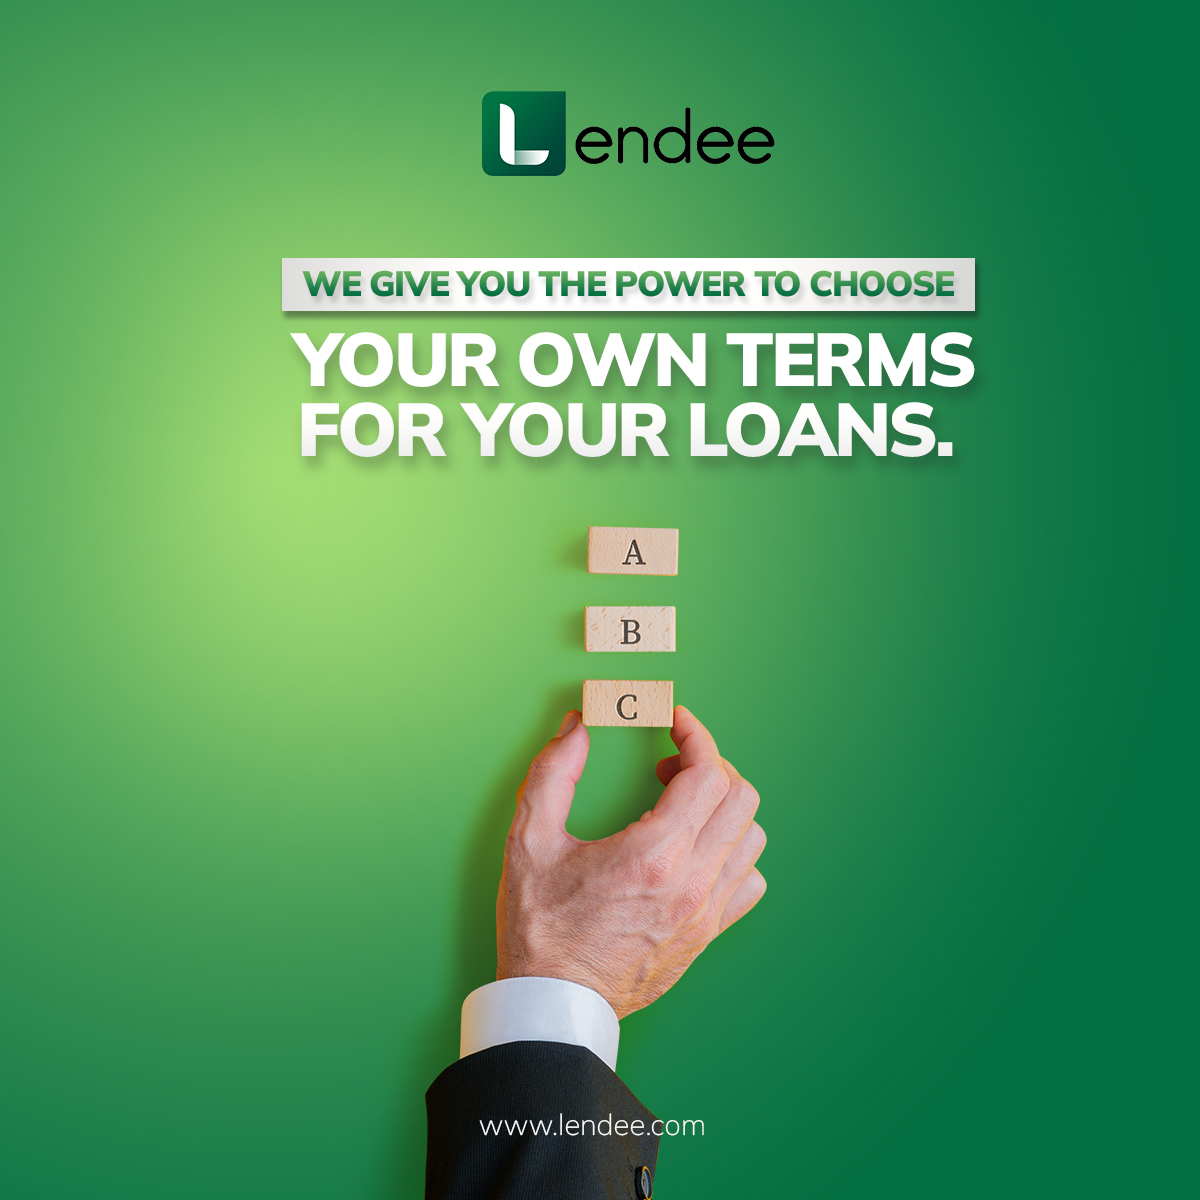 Borrowers can choose what's best for them and get loans at competitive rates with Lendee.

Download the Lendee app today to get exciting offers.

Click on the link in bio to know more!

#Lendee #microloans #peertopeer #investing